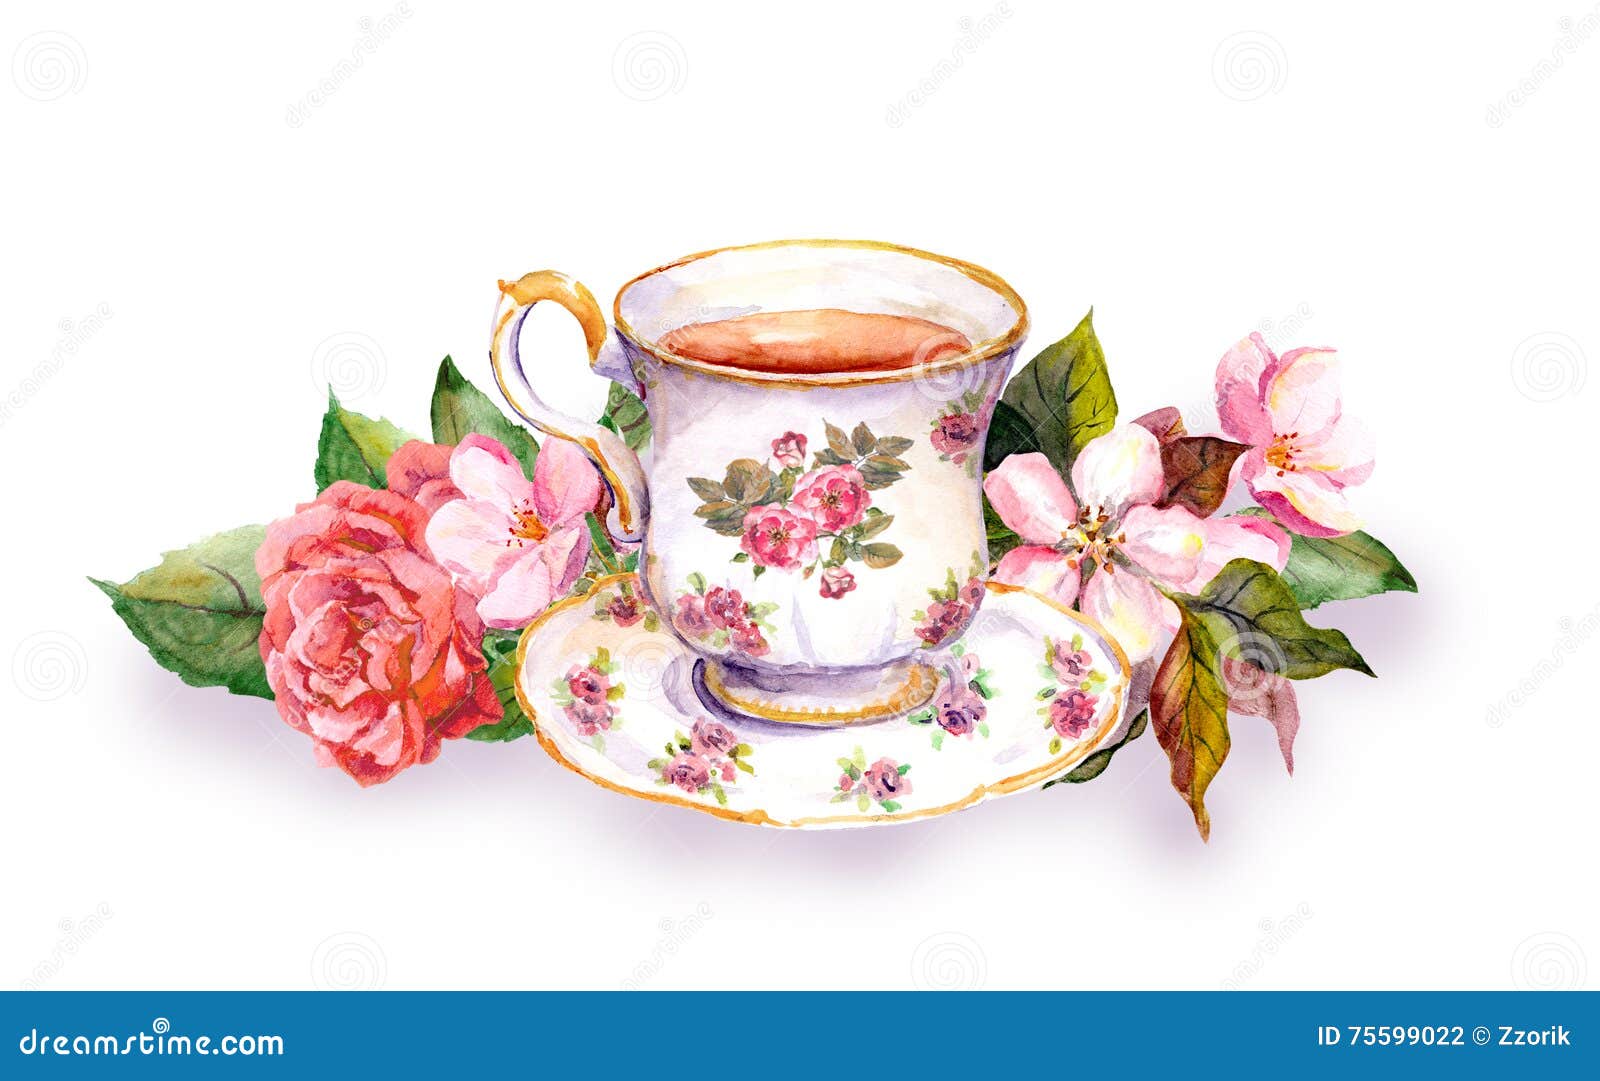 teacup and tea pot with pink flowers. watercolor